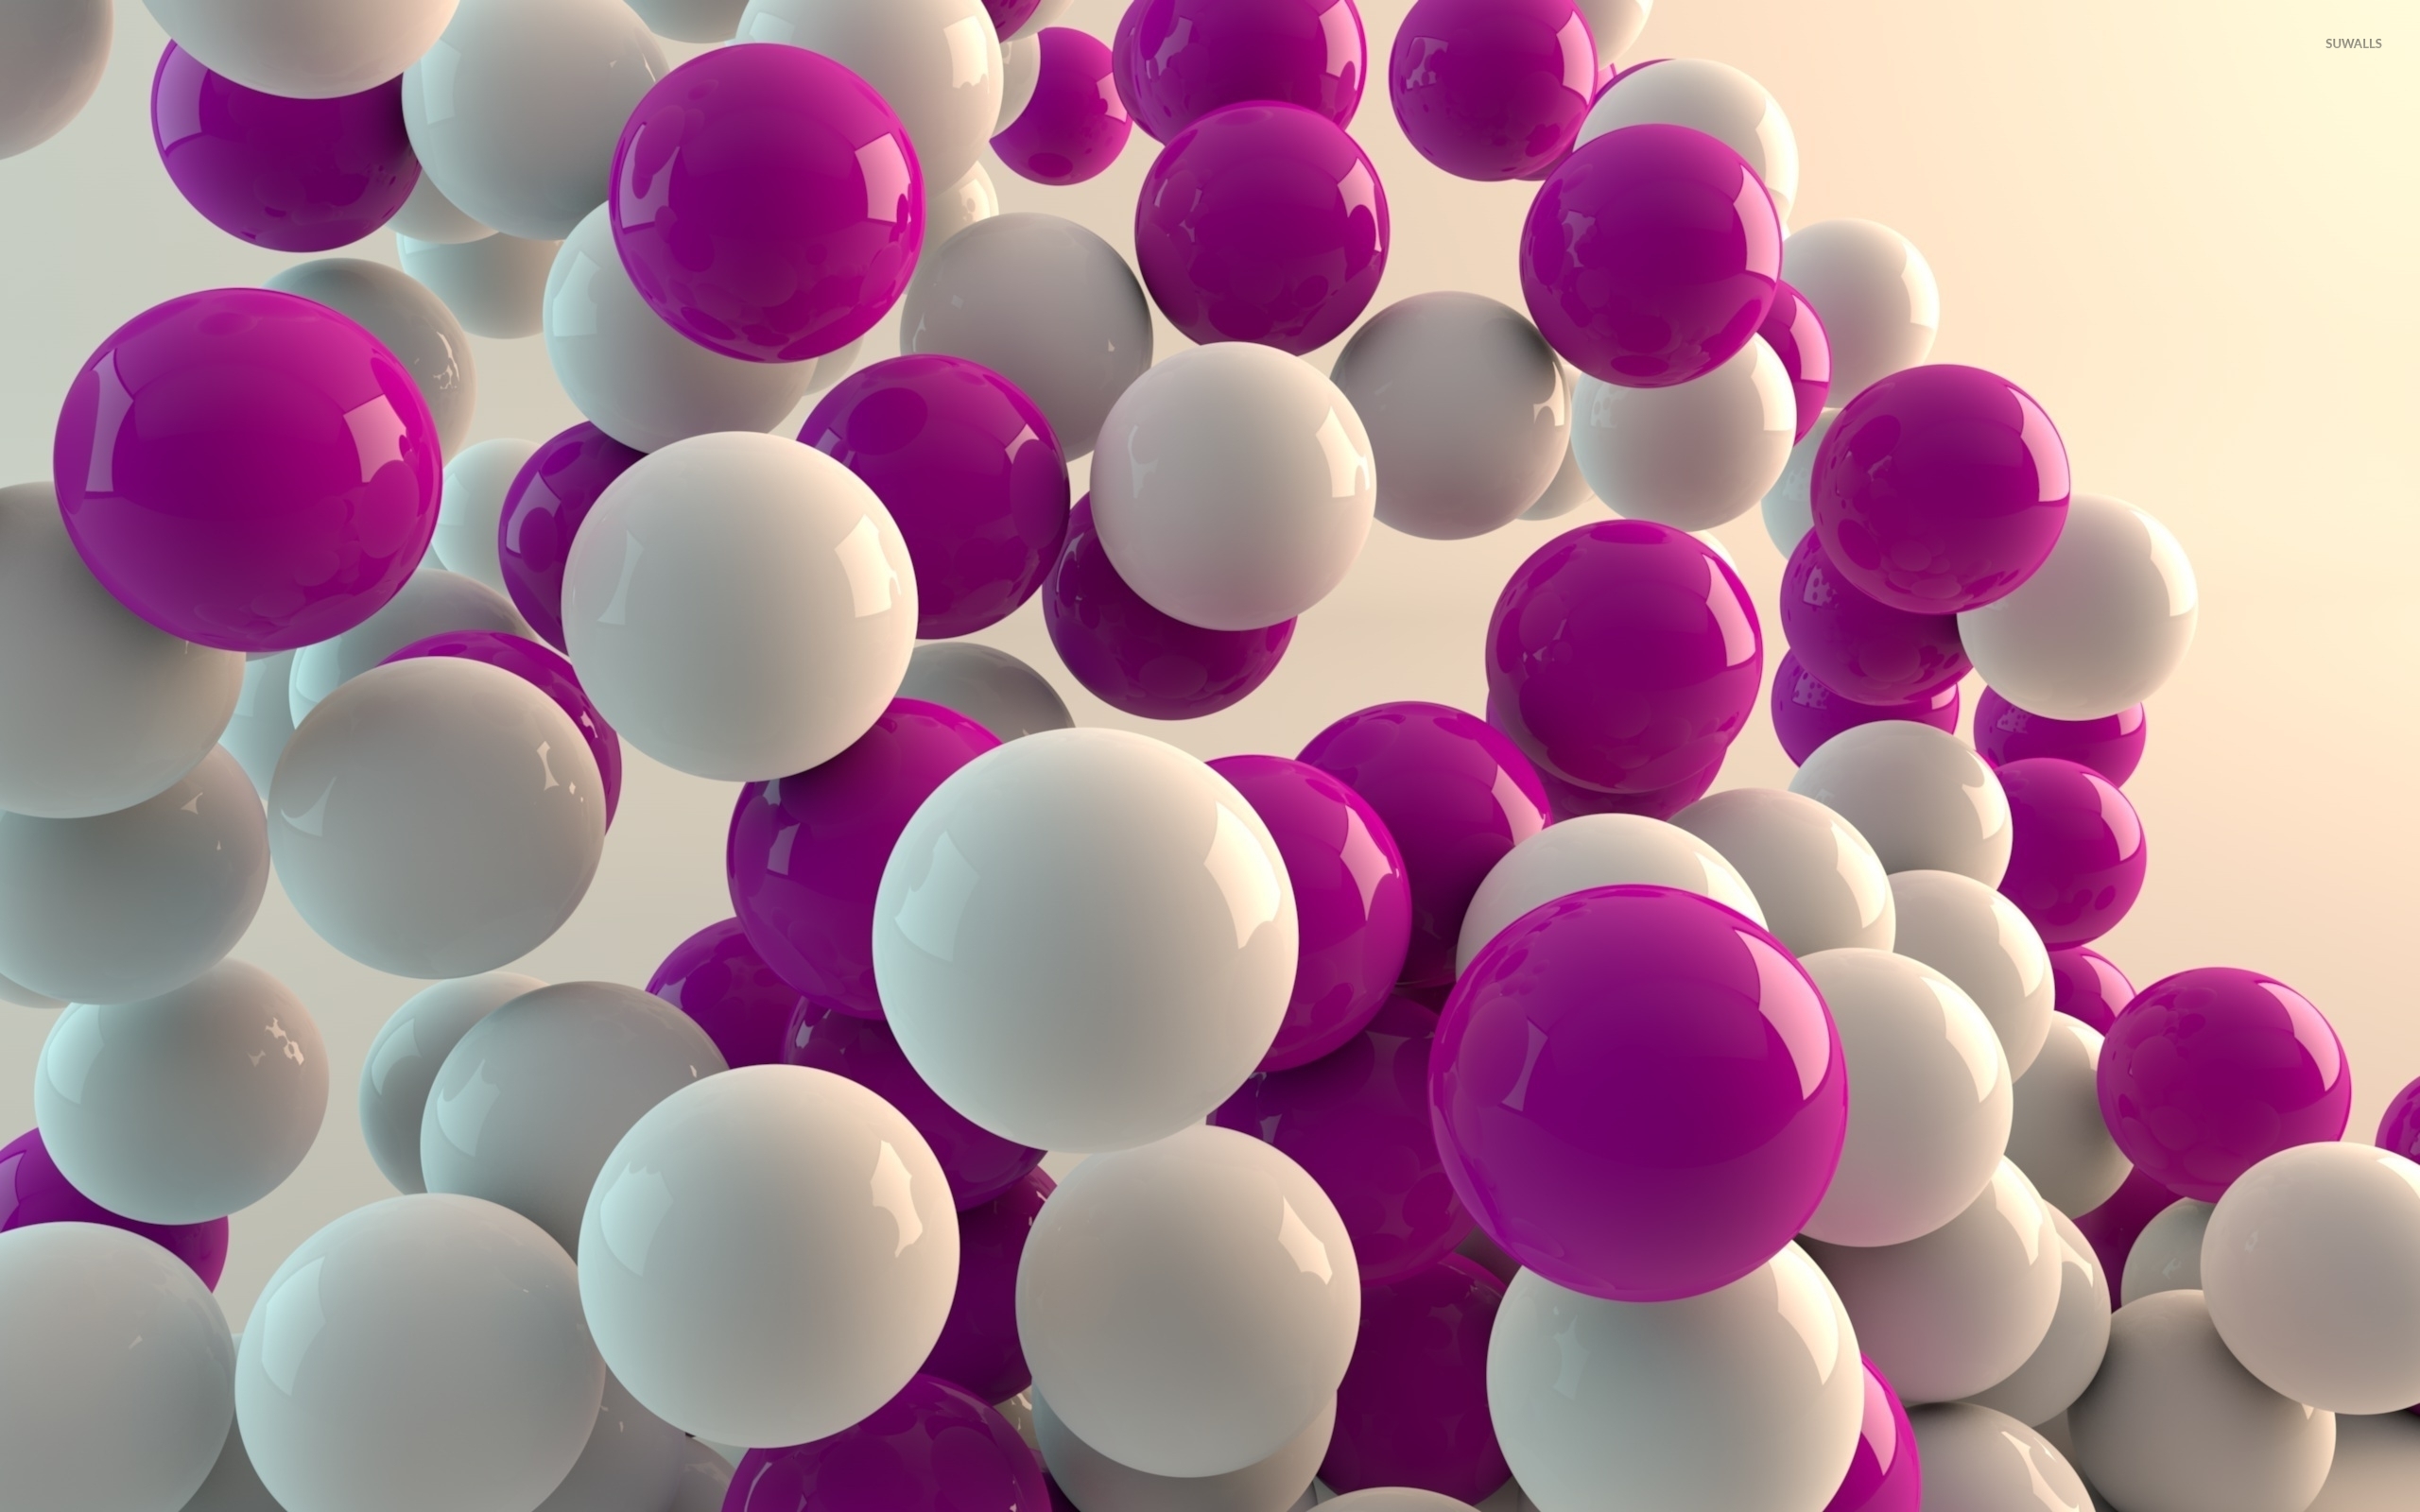 White and pink balls wallpaper - 3D wallpapers - #40993